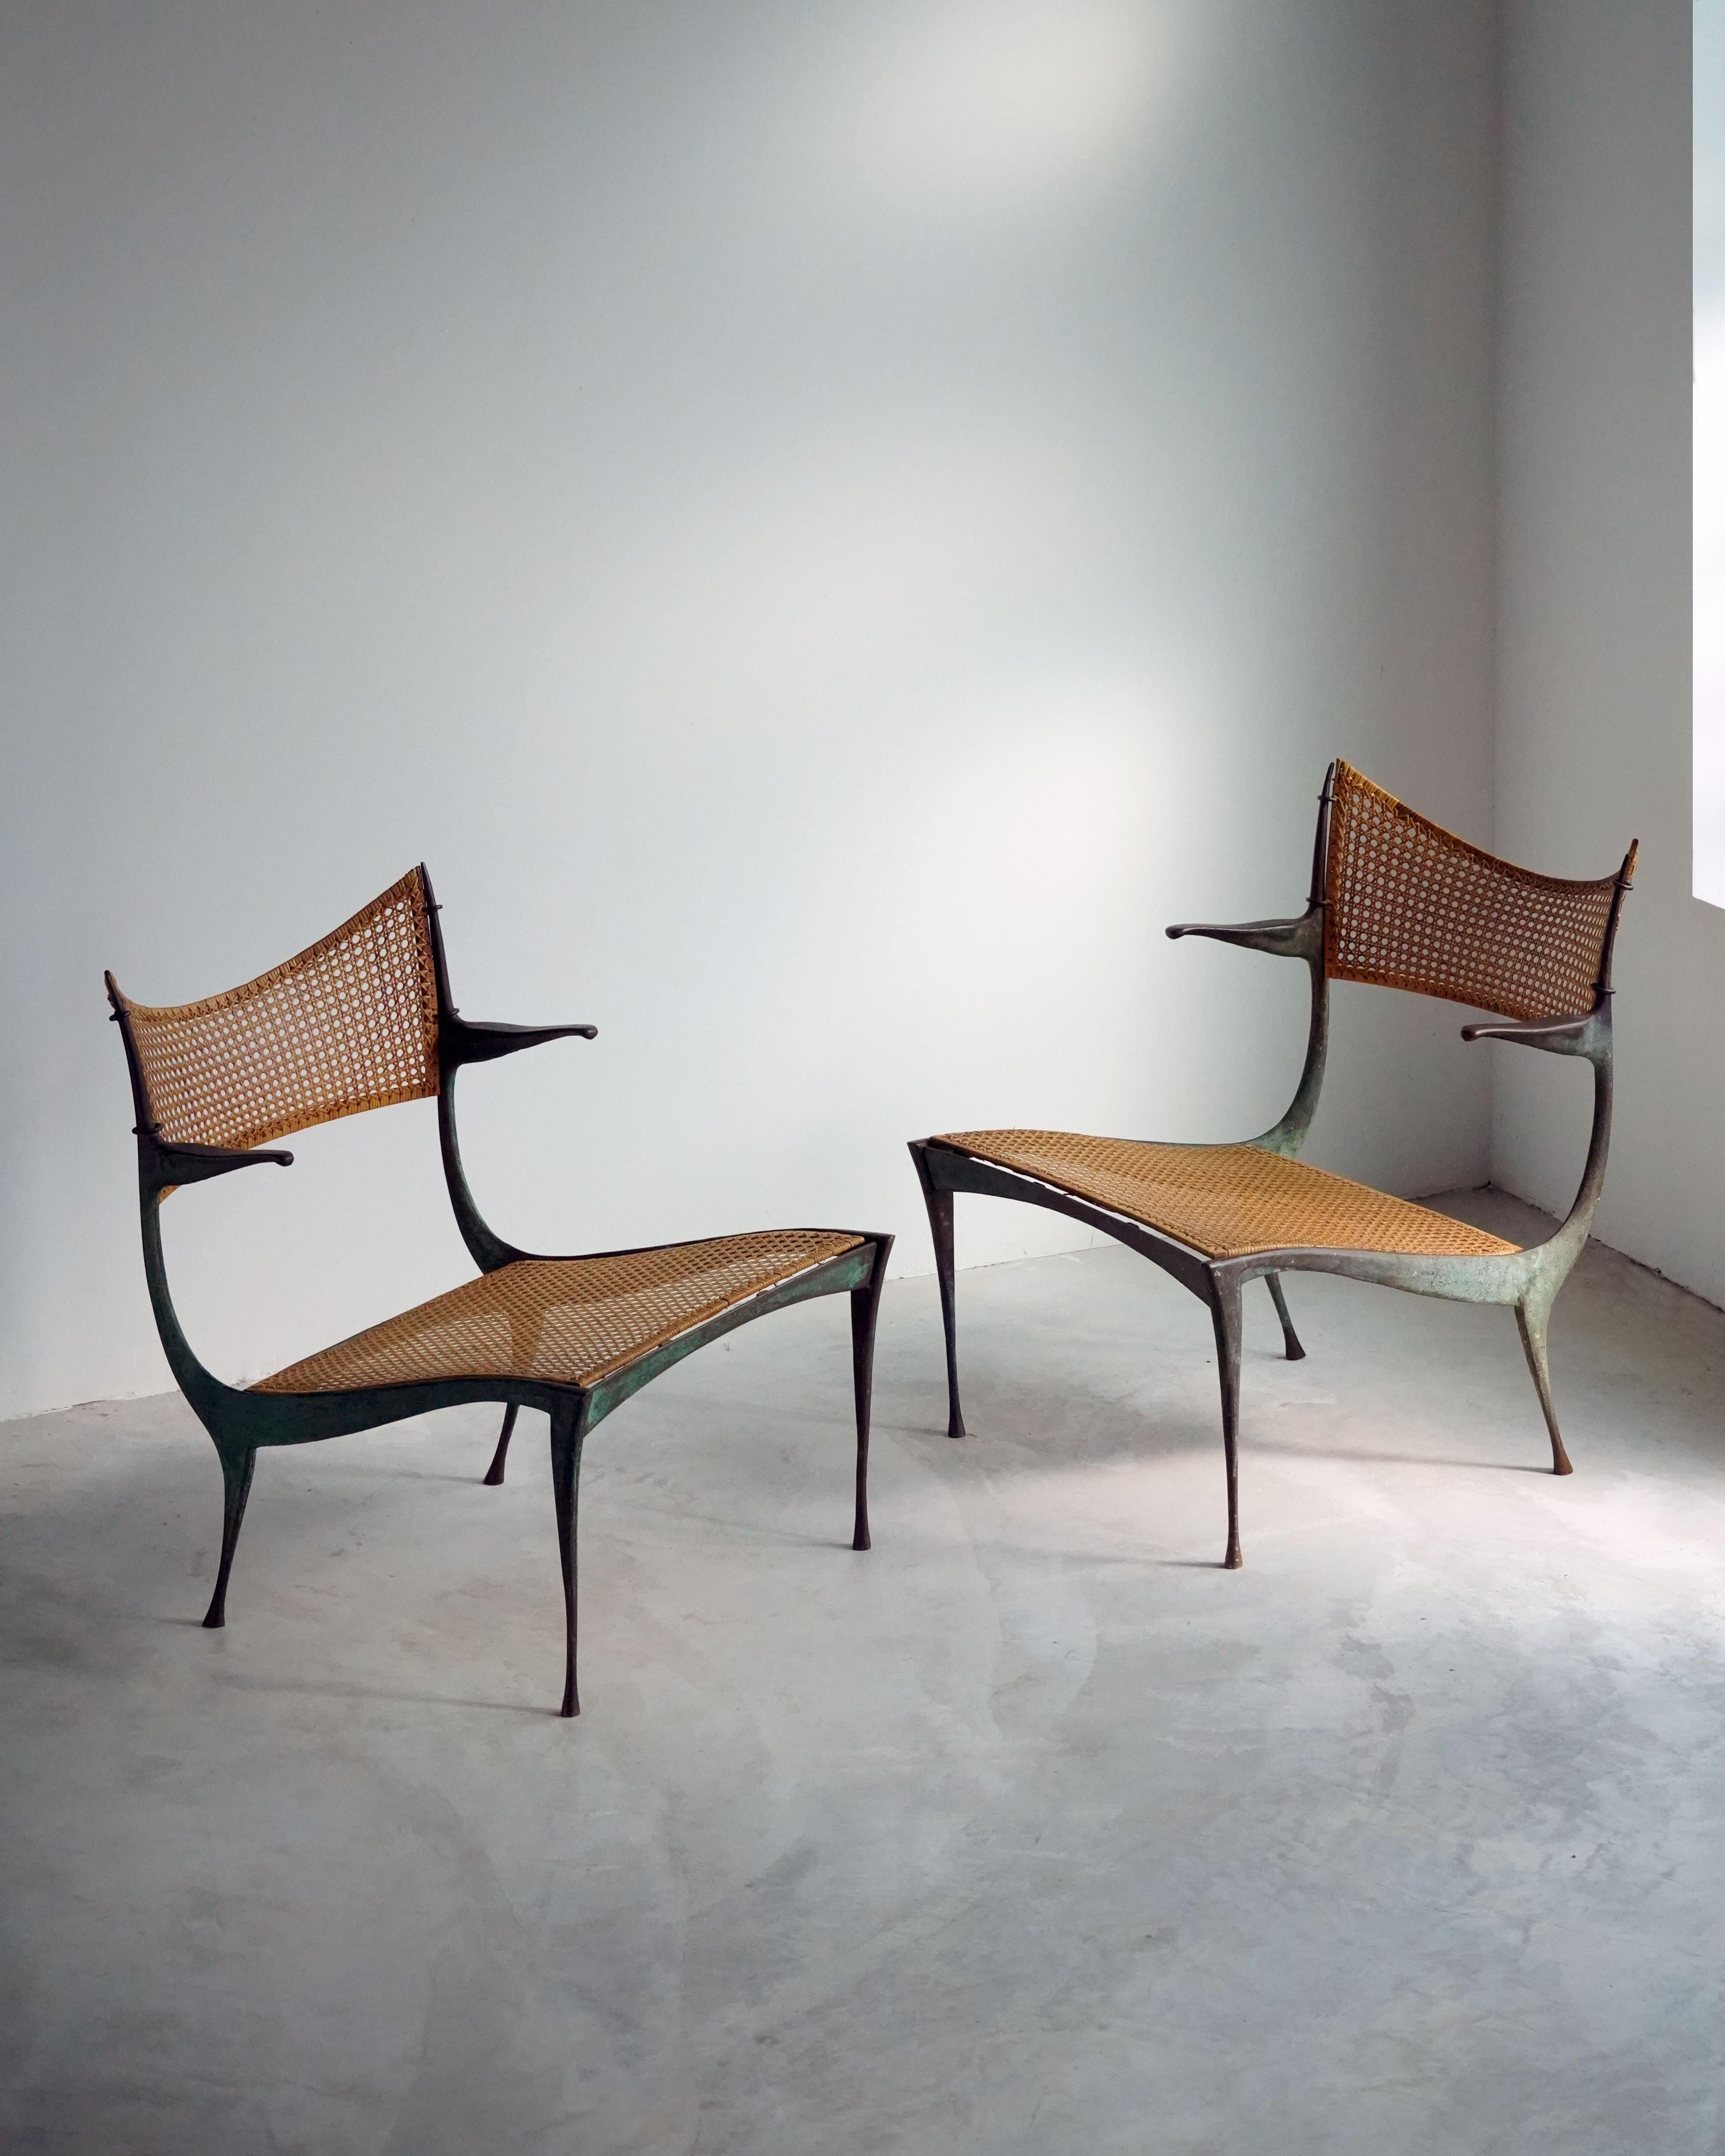 While working on a commission to design an apartment in Rome, American Designer, Dan Johnsson conjured the idea for the “Gazelle” series. In order to realize these highly intricate designs, Johnsson turned to highly skilled local cabinet makers in